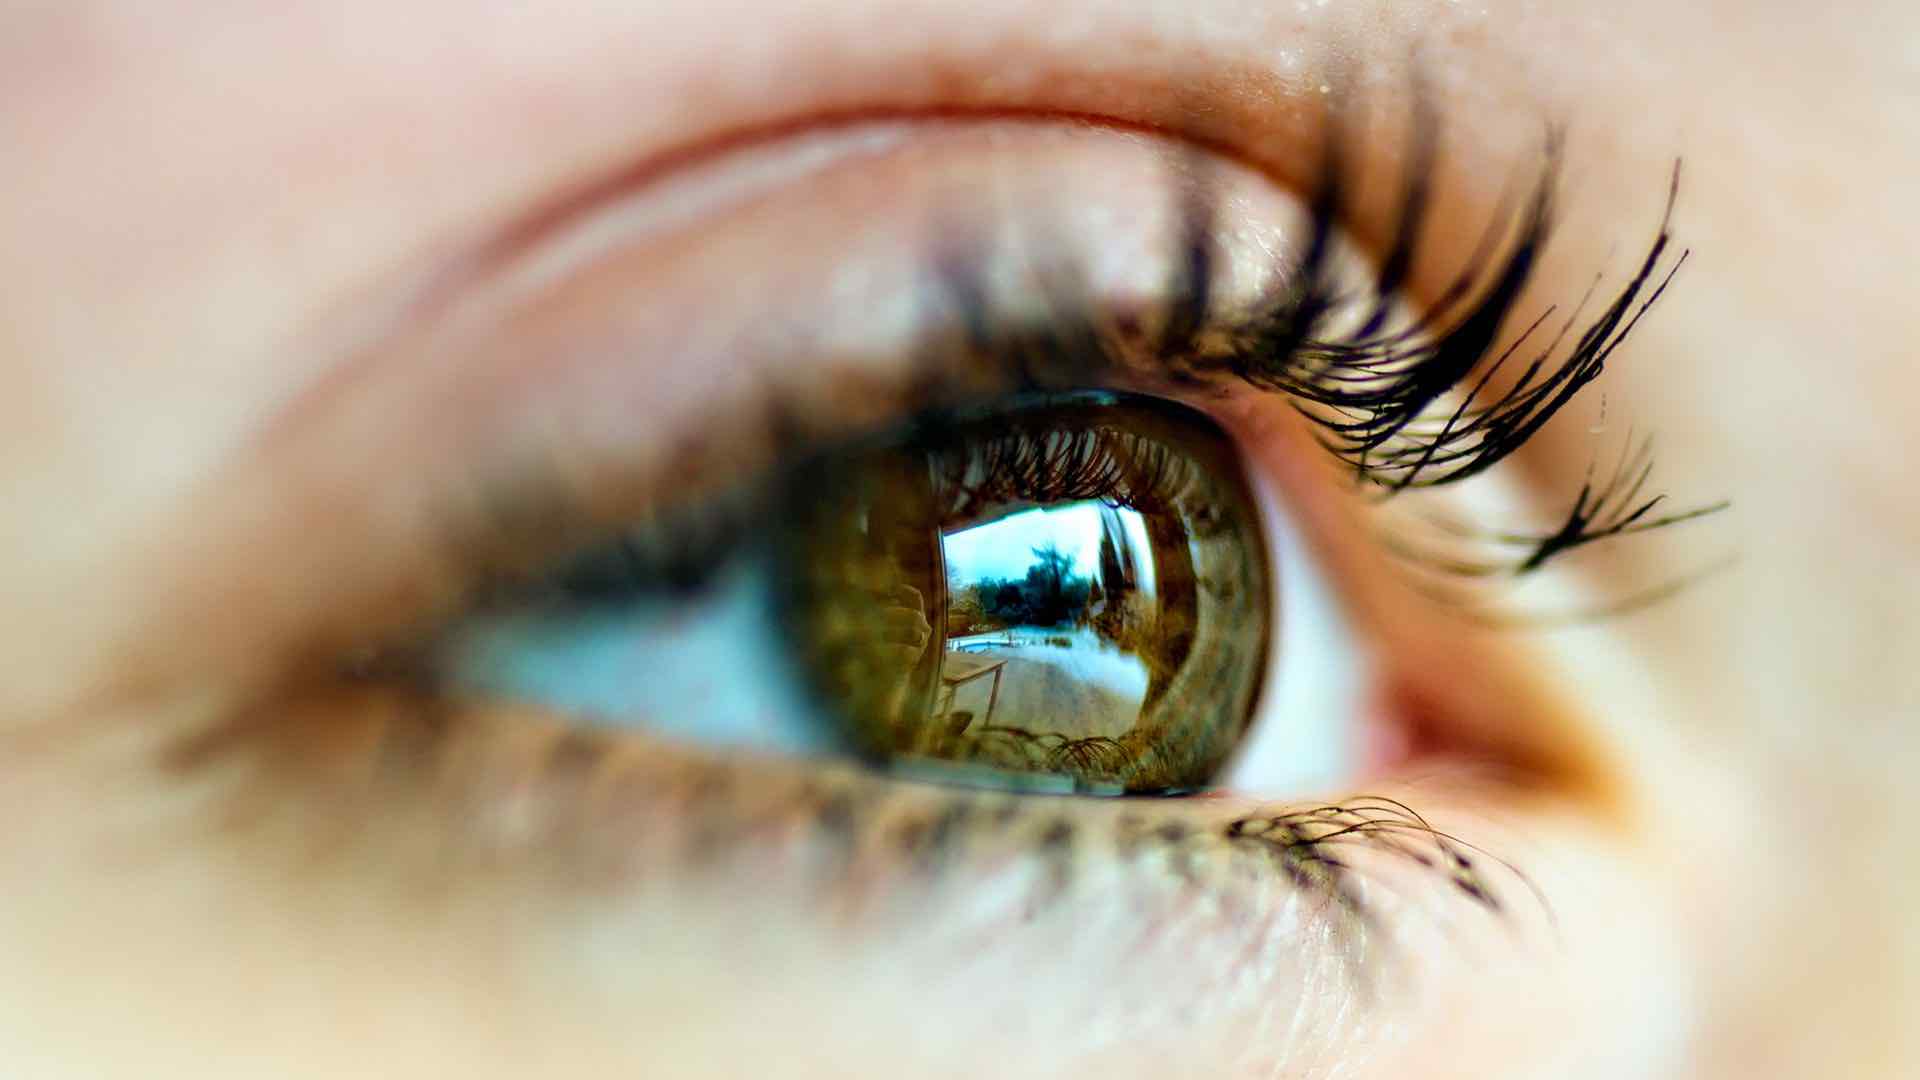 A woman's eye zoomed in from the side